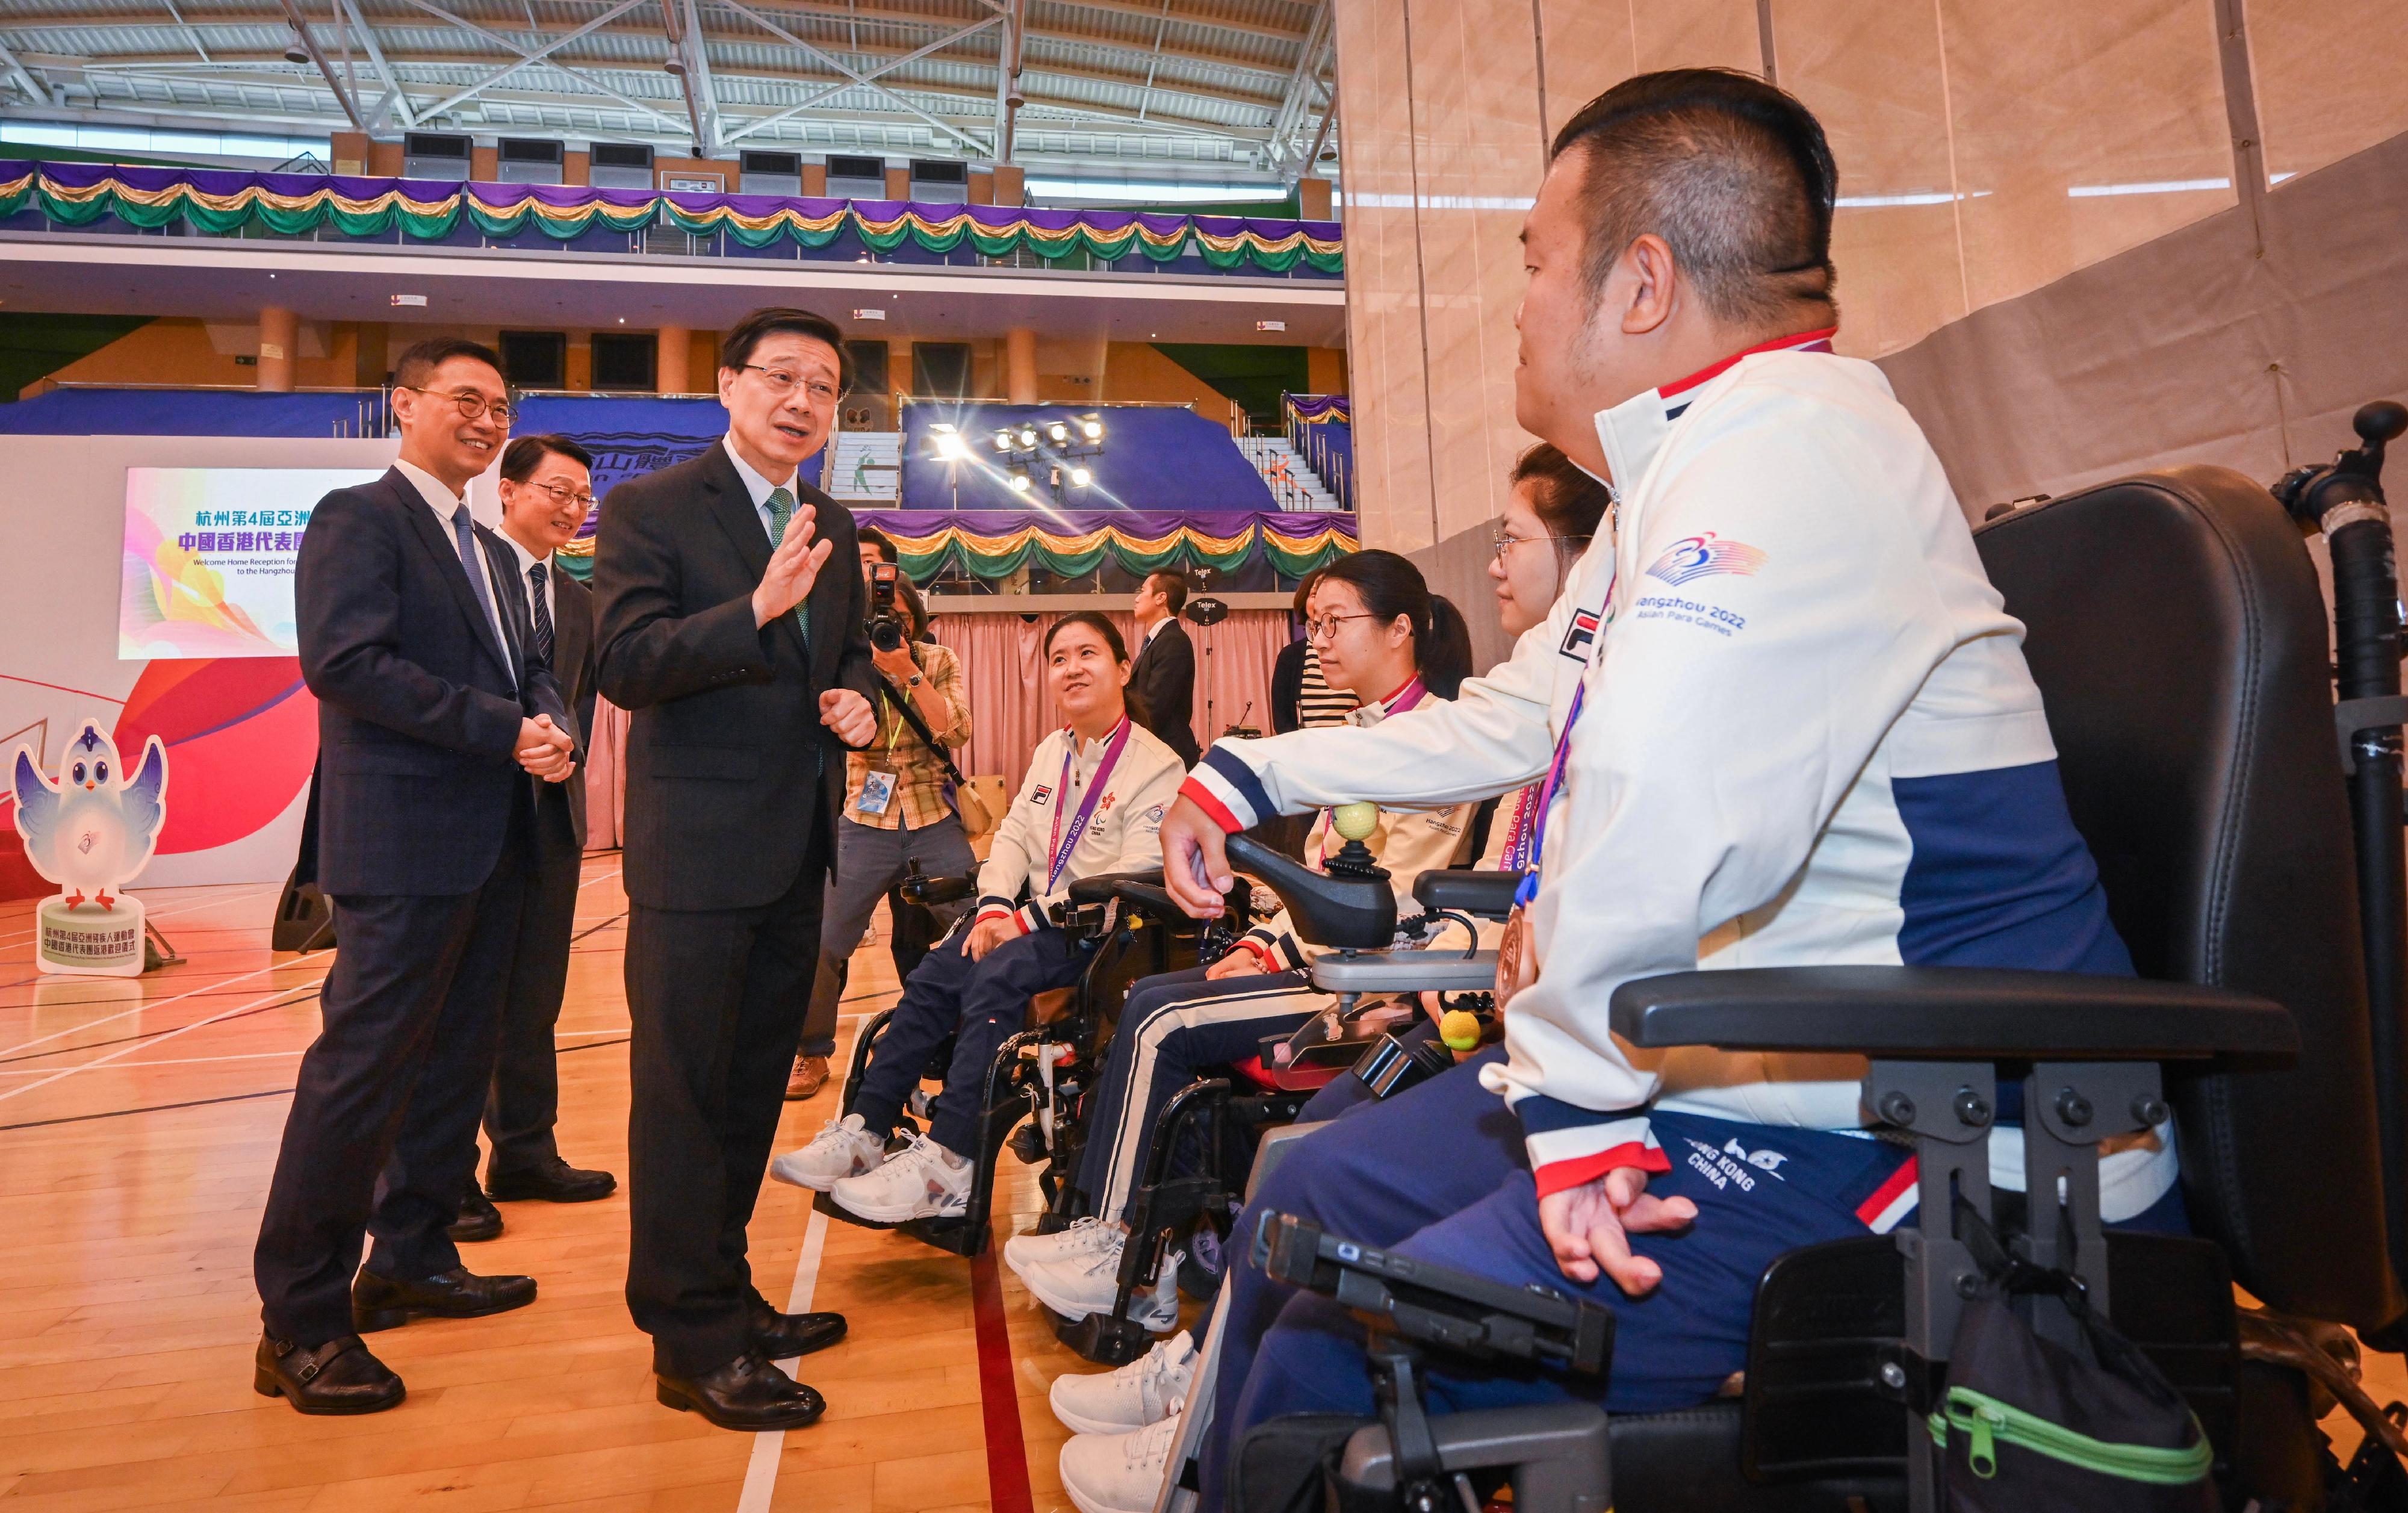 The Chief Executive, Mr John Lee, attended the welcome home reception for the Hong Kong, China Delegation from the 4th Asian Para Games Hangzhou today (November 13). Photo shows Mr Lee (front row, second left), accompanied by the Secretary for Culture, Sports and Tourism, Mr Kevin Yeung (front row, first left), and the Director of Leisure and Cultural Services, Mr Vincent Liu (back row, first left), interacting with athletes.